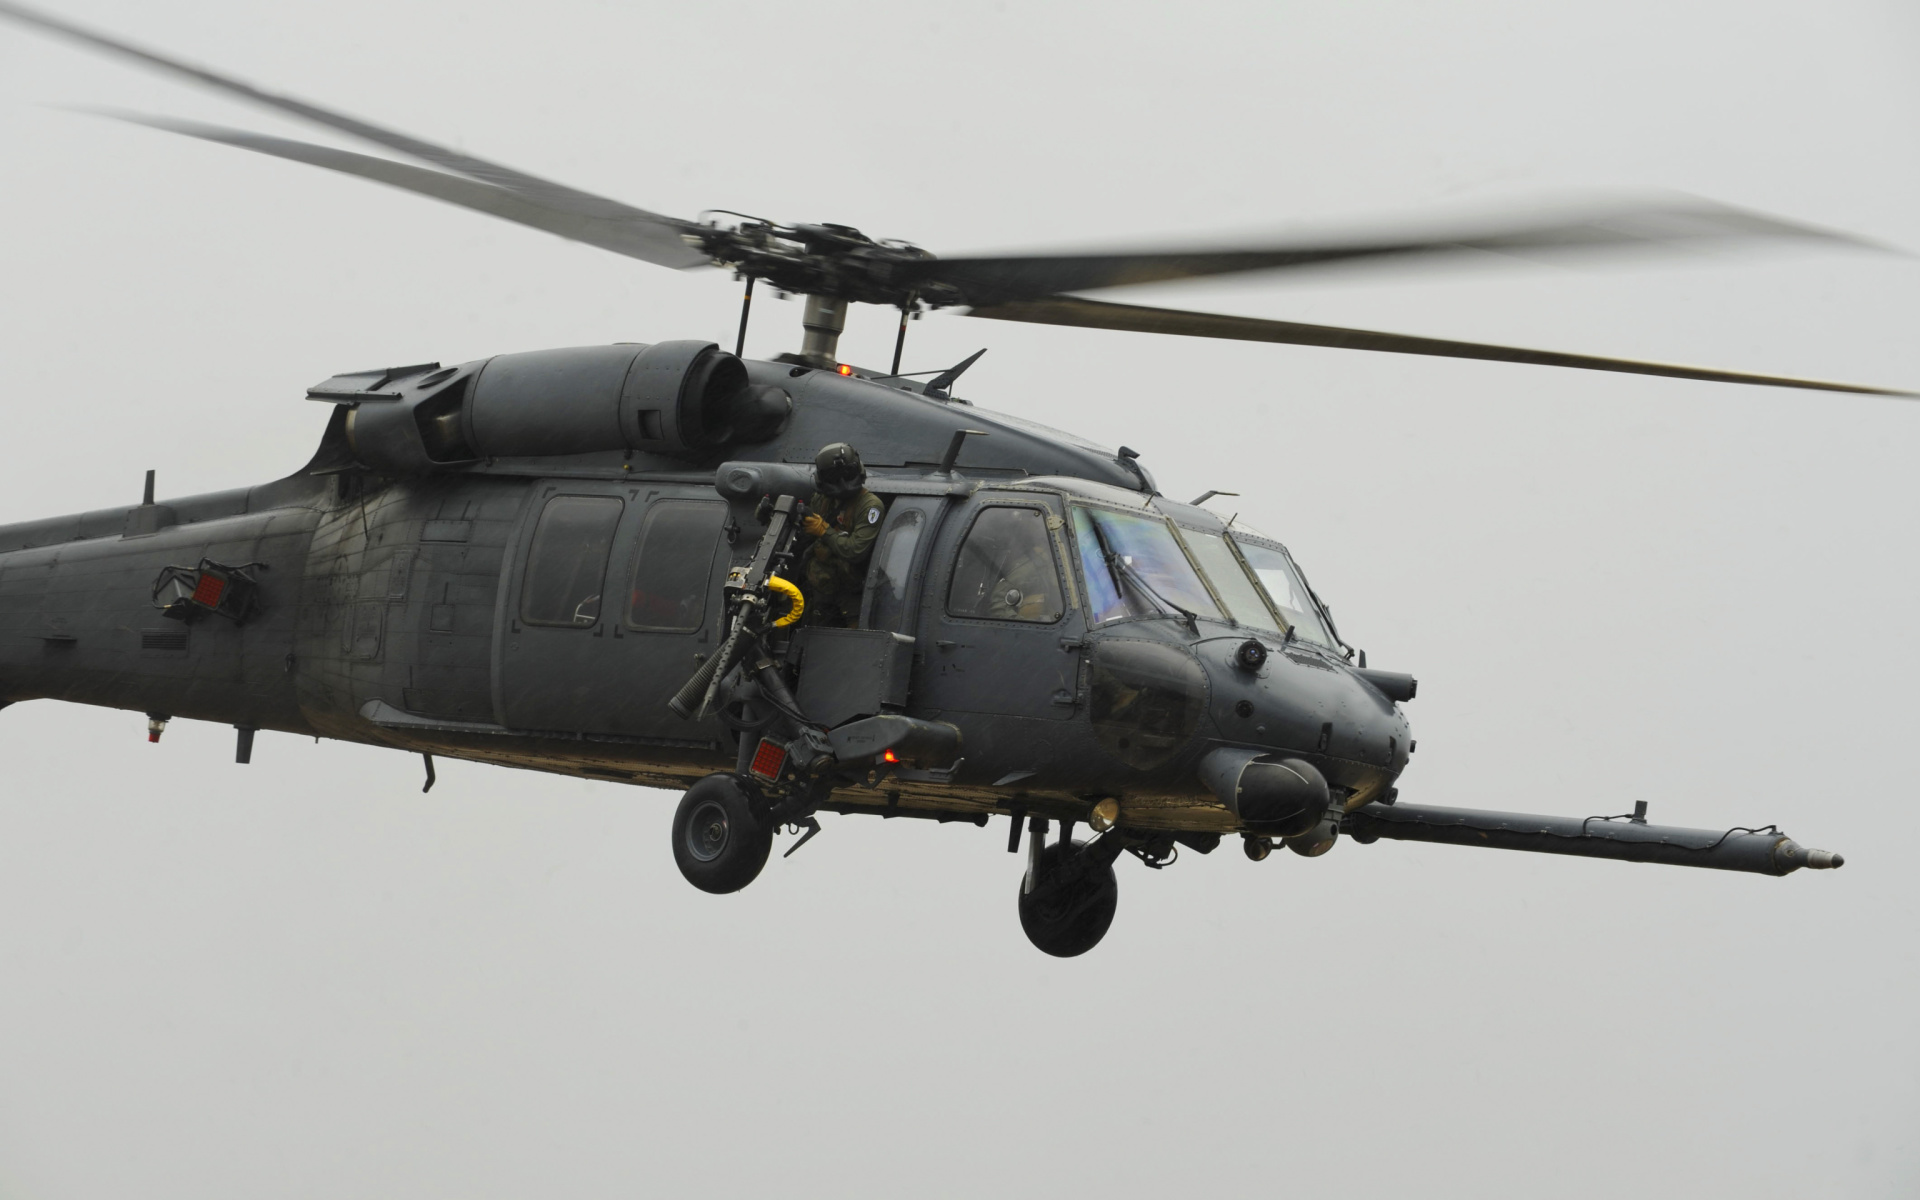 Helicopter Sikorsky HH 60 Pave Hawk wallpaper 1920x1200